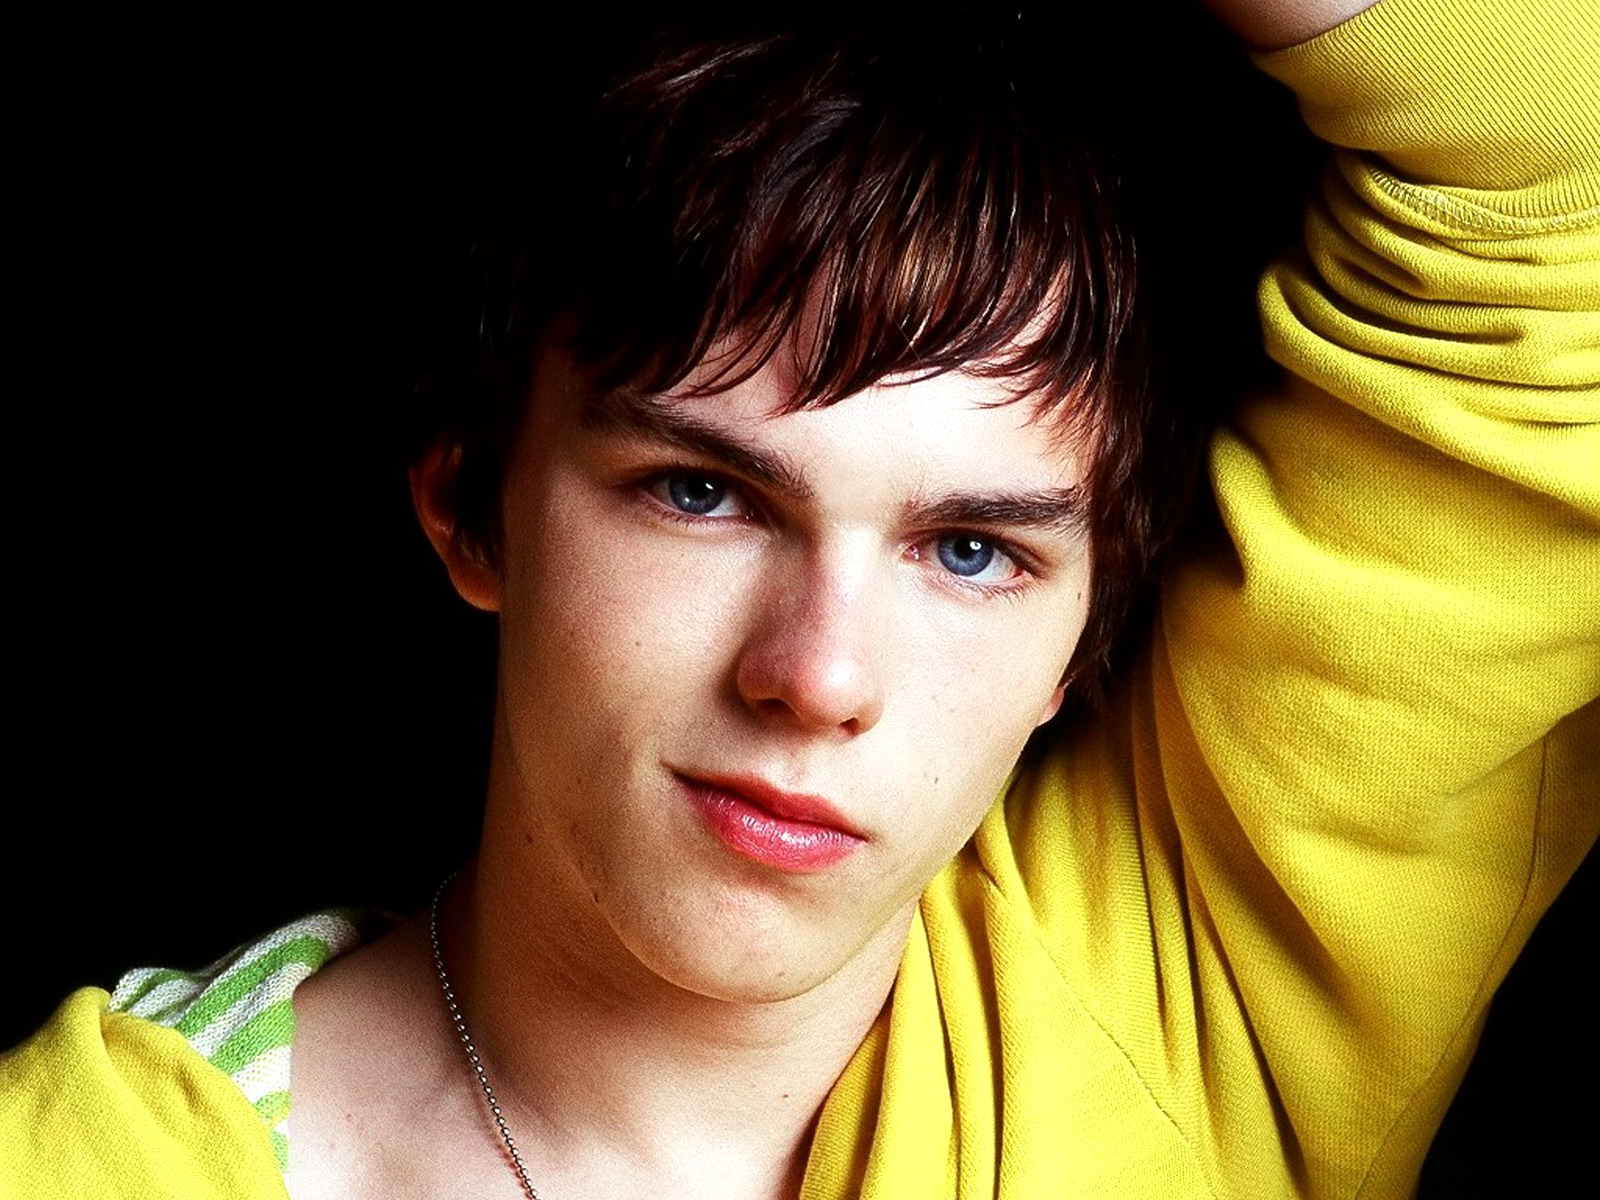 Nicholas Hoult Wallpapers High Resolution and Quality Download